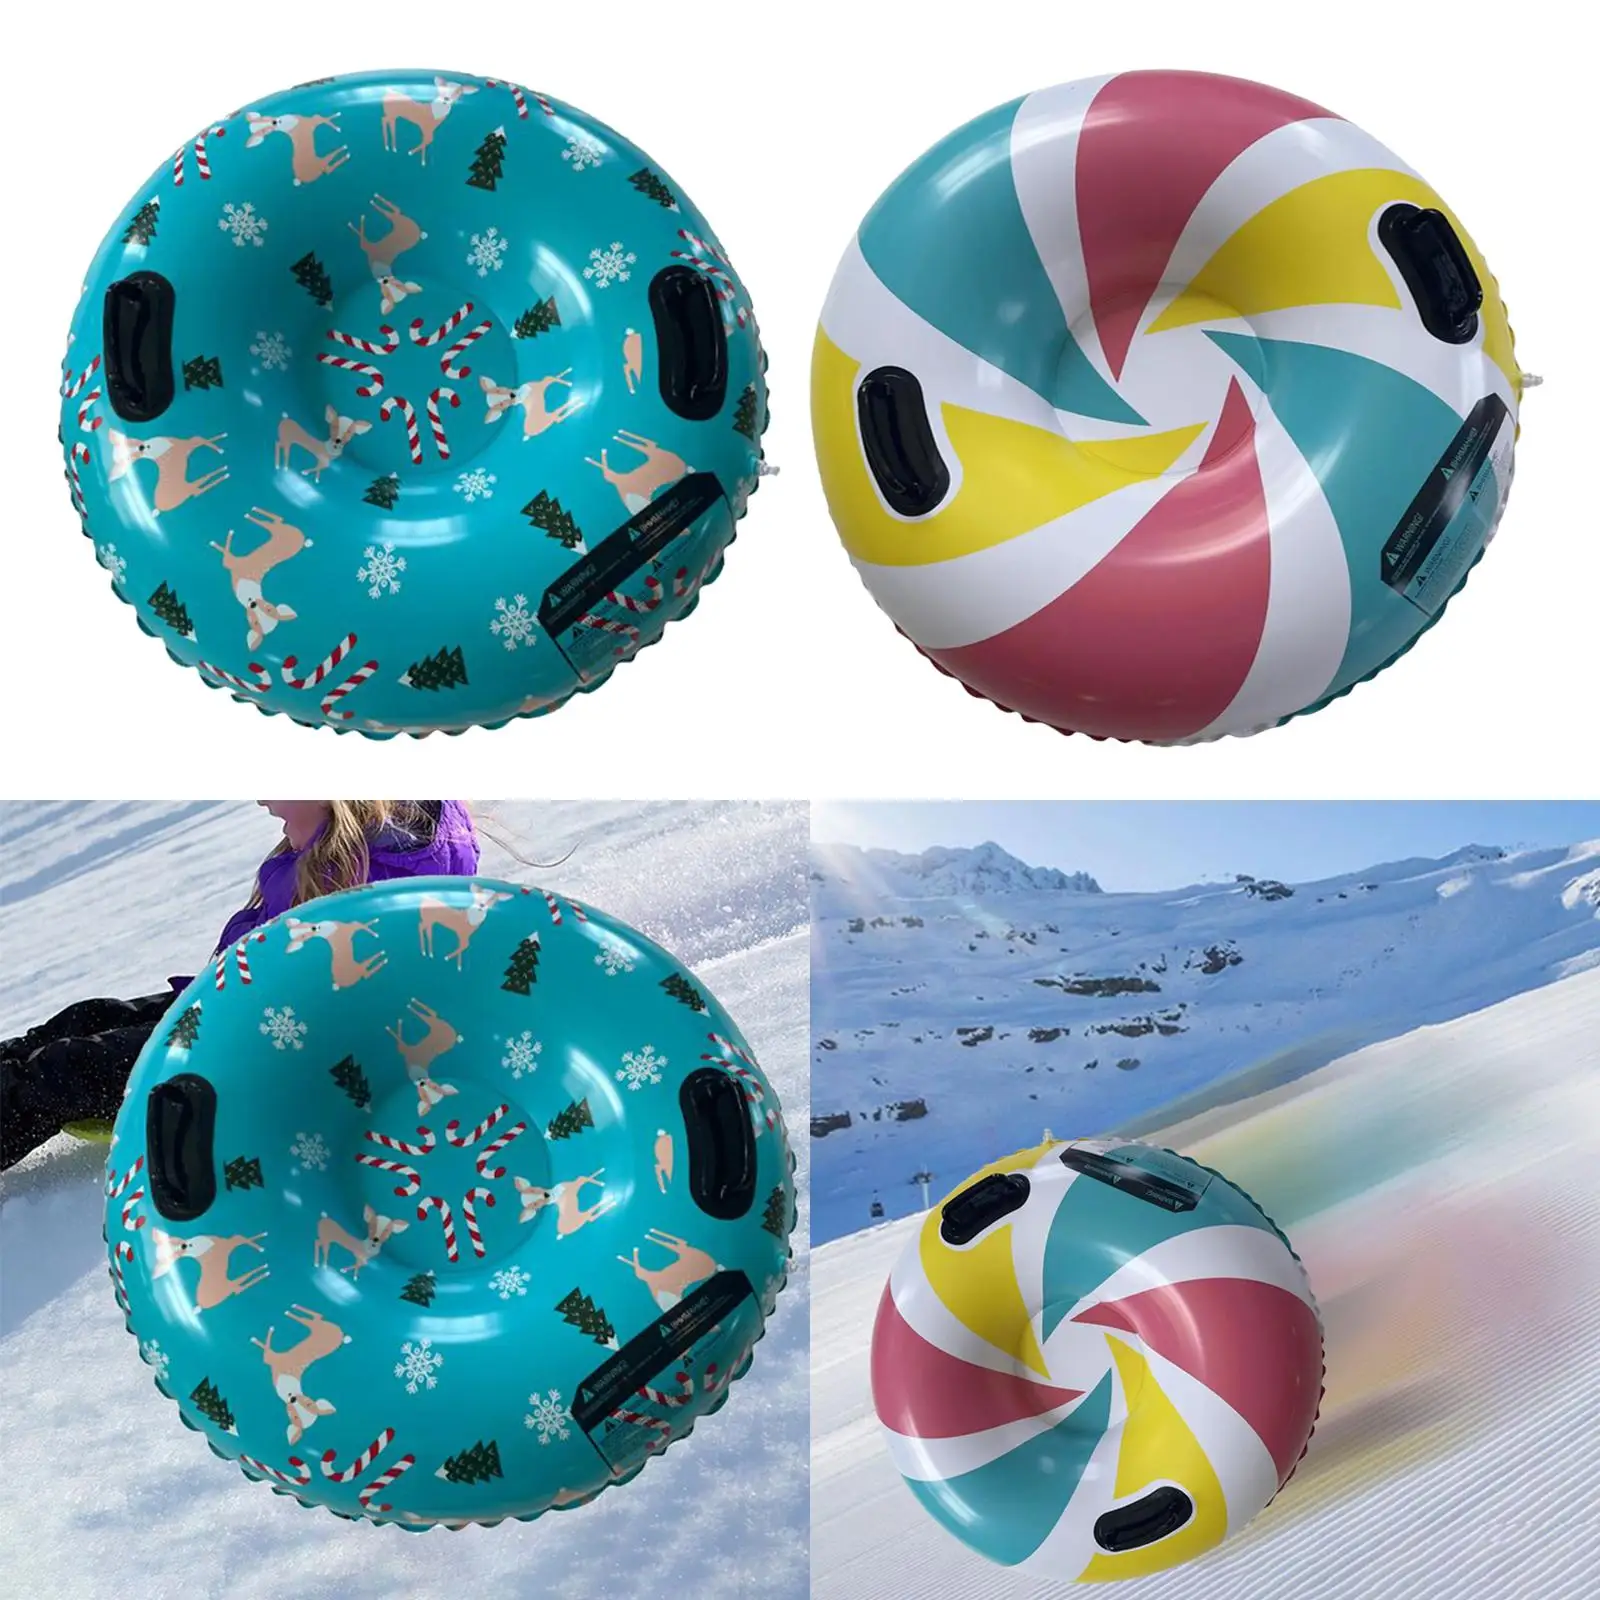 Winter Snow Tube Snow Toys Sleigh 35.83inch with Thickness Bottom Tube